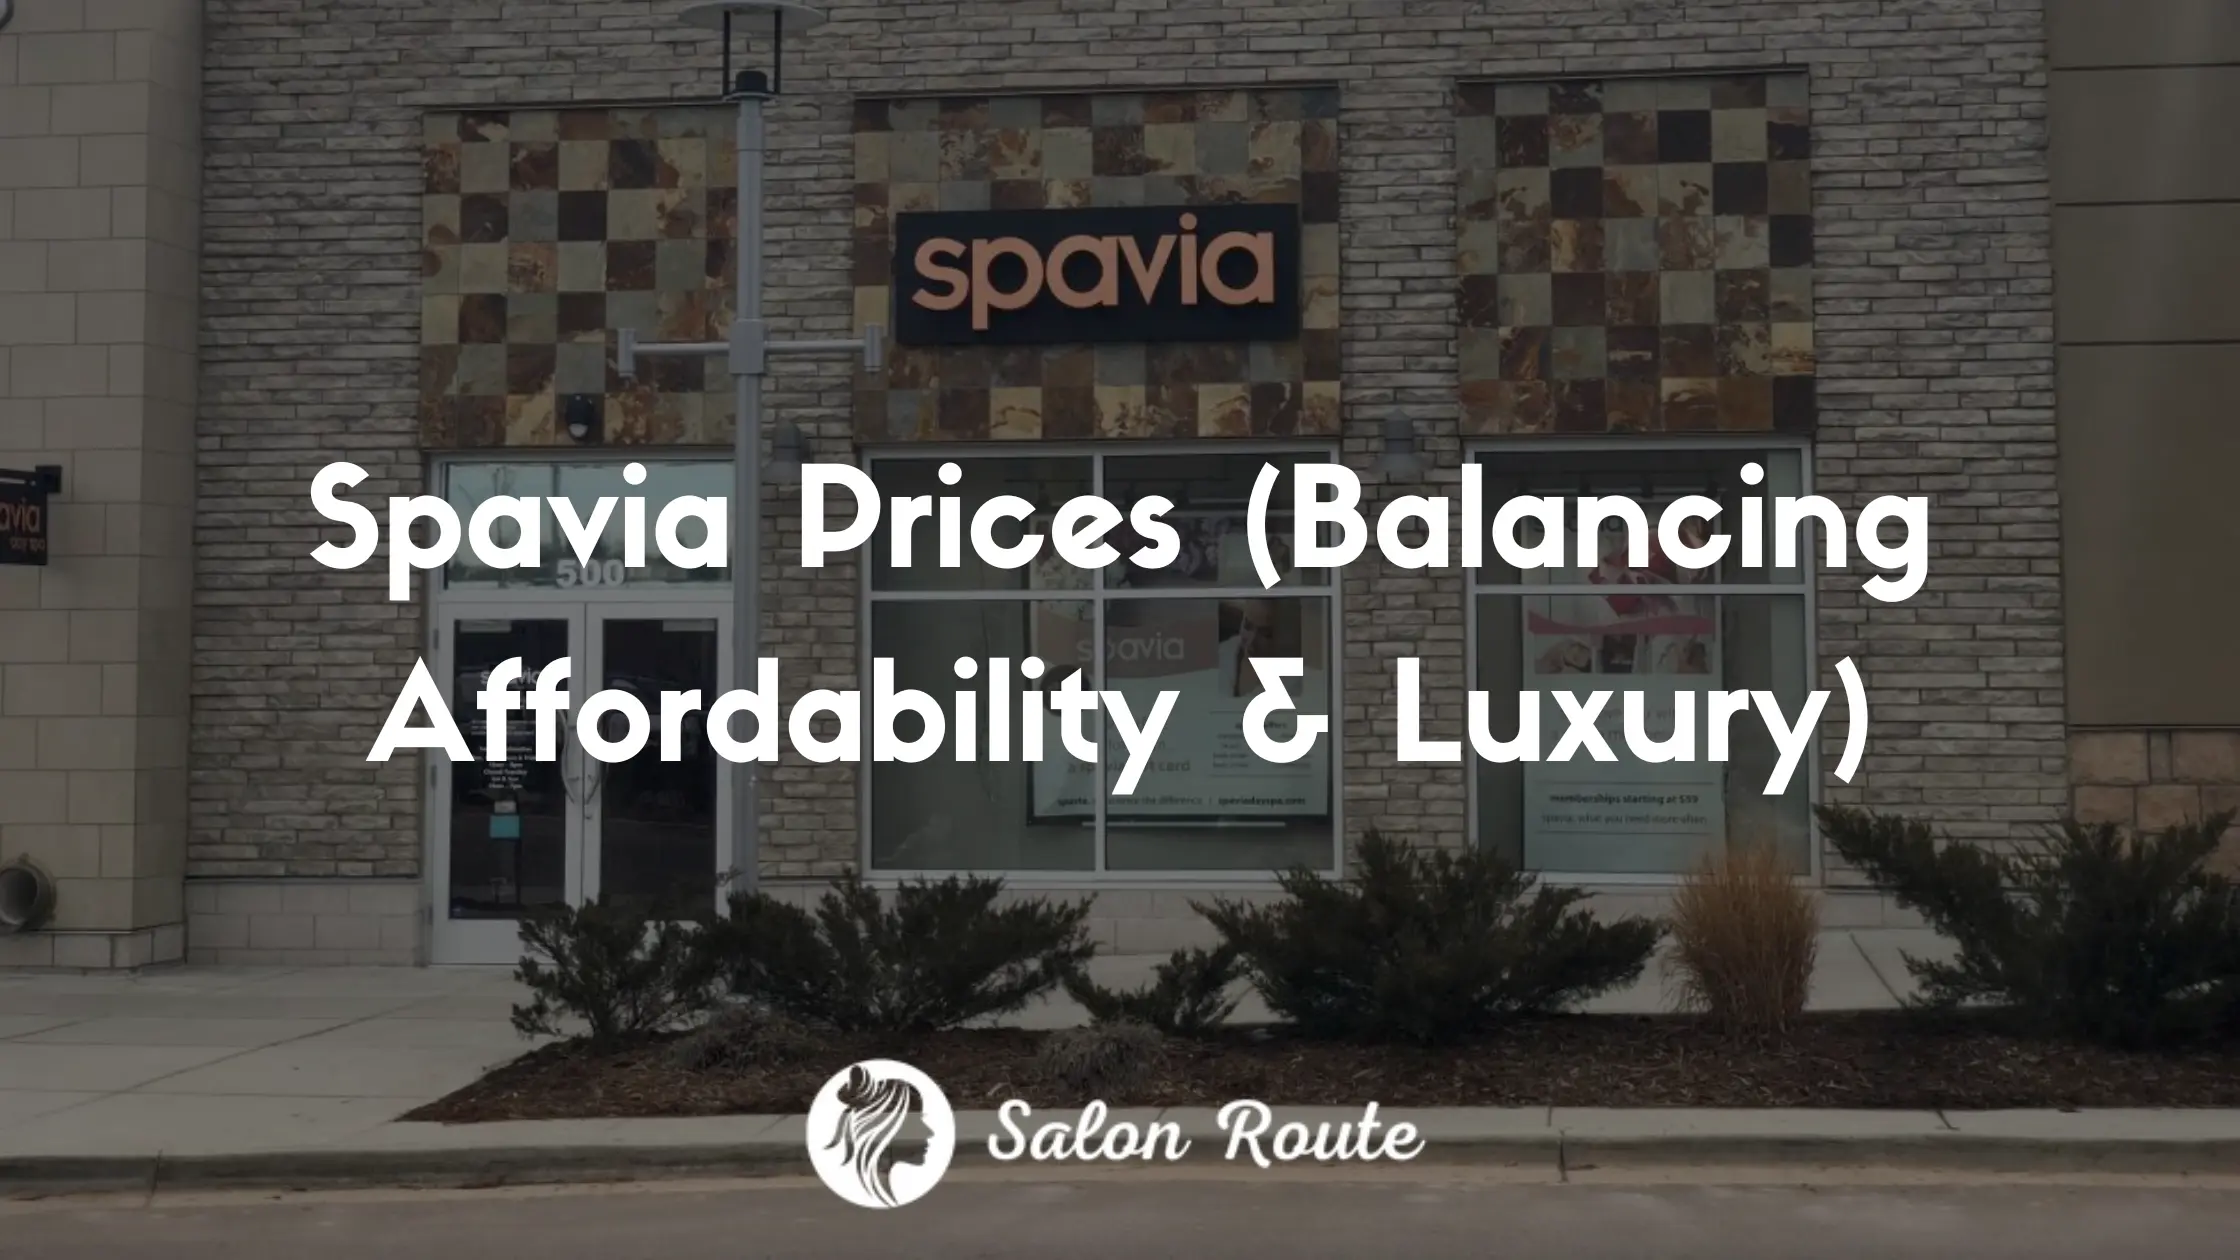 Spavia Prices (Balancing Affordability & Luxury)